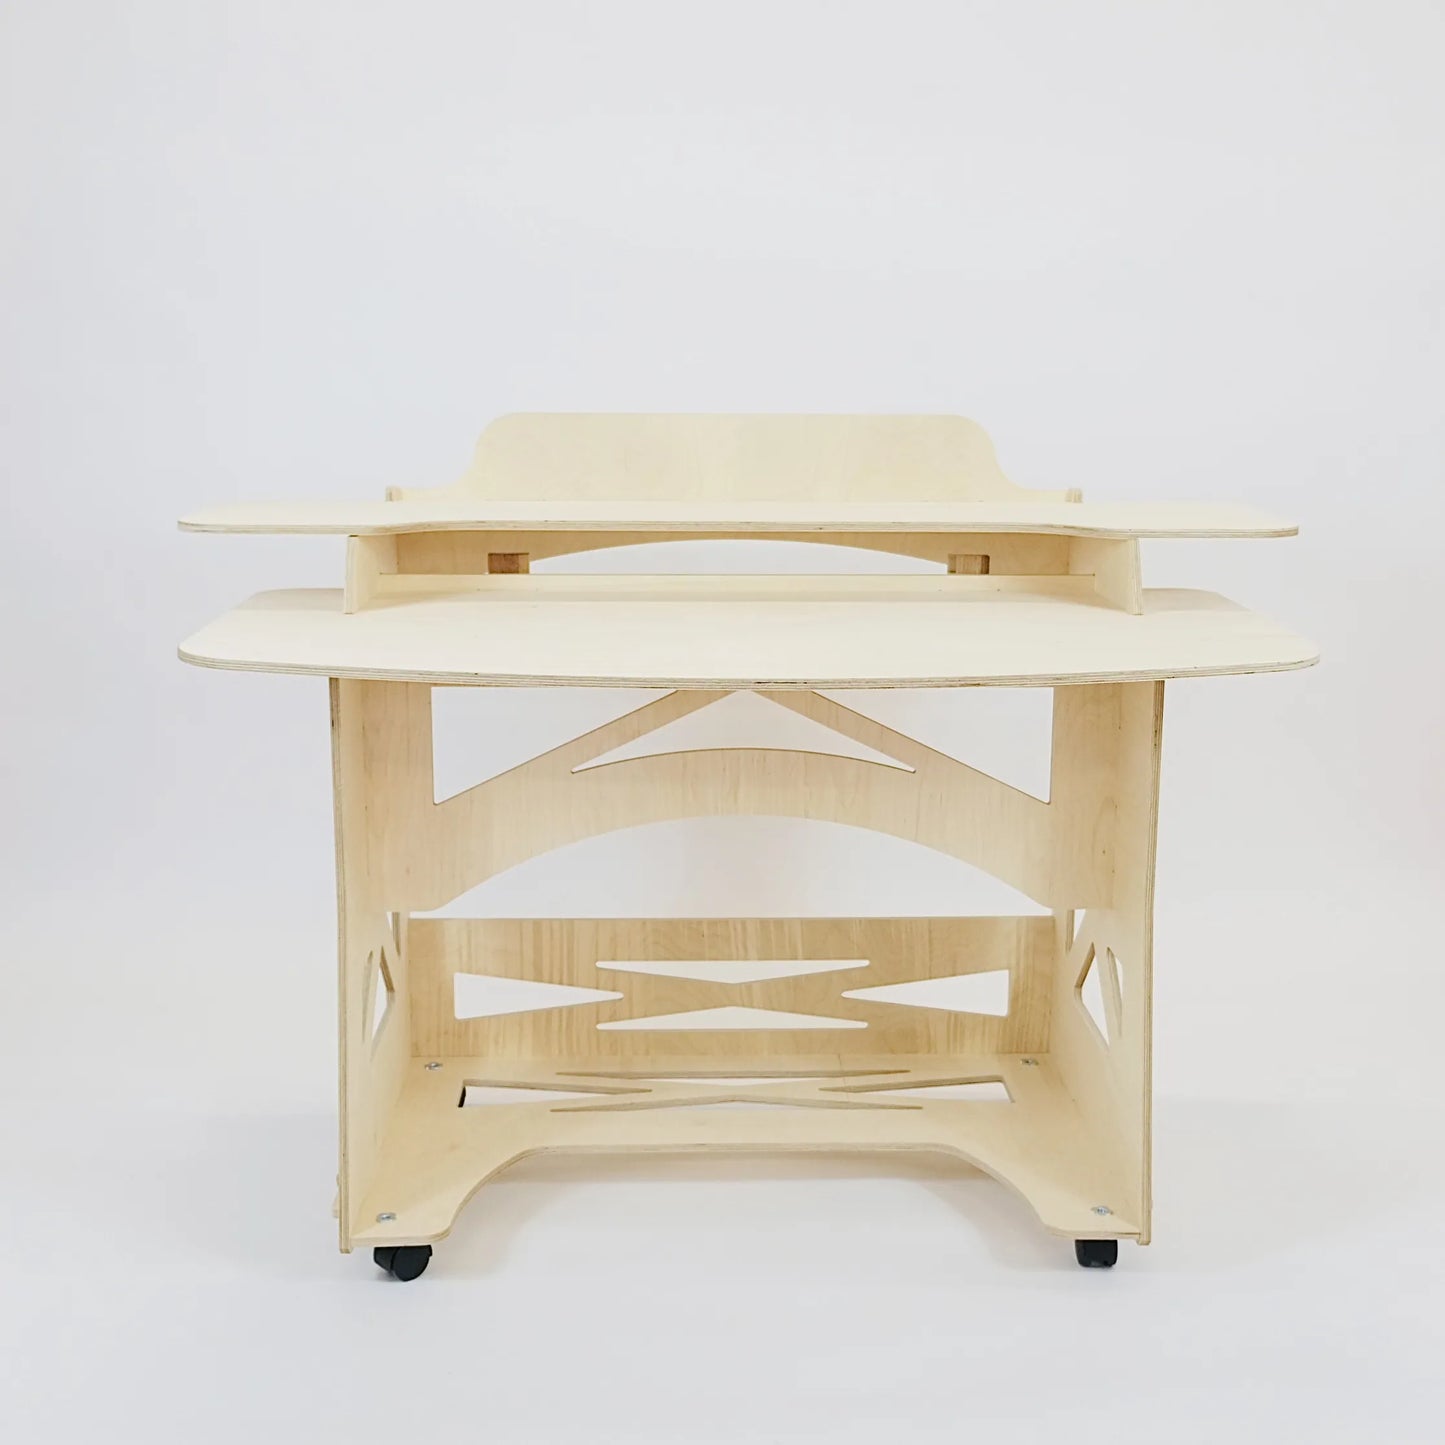  A pale wooden desk sits facing front on. Showing castors, and two desk top levels.